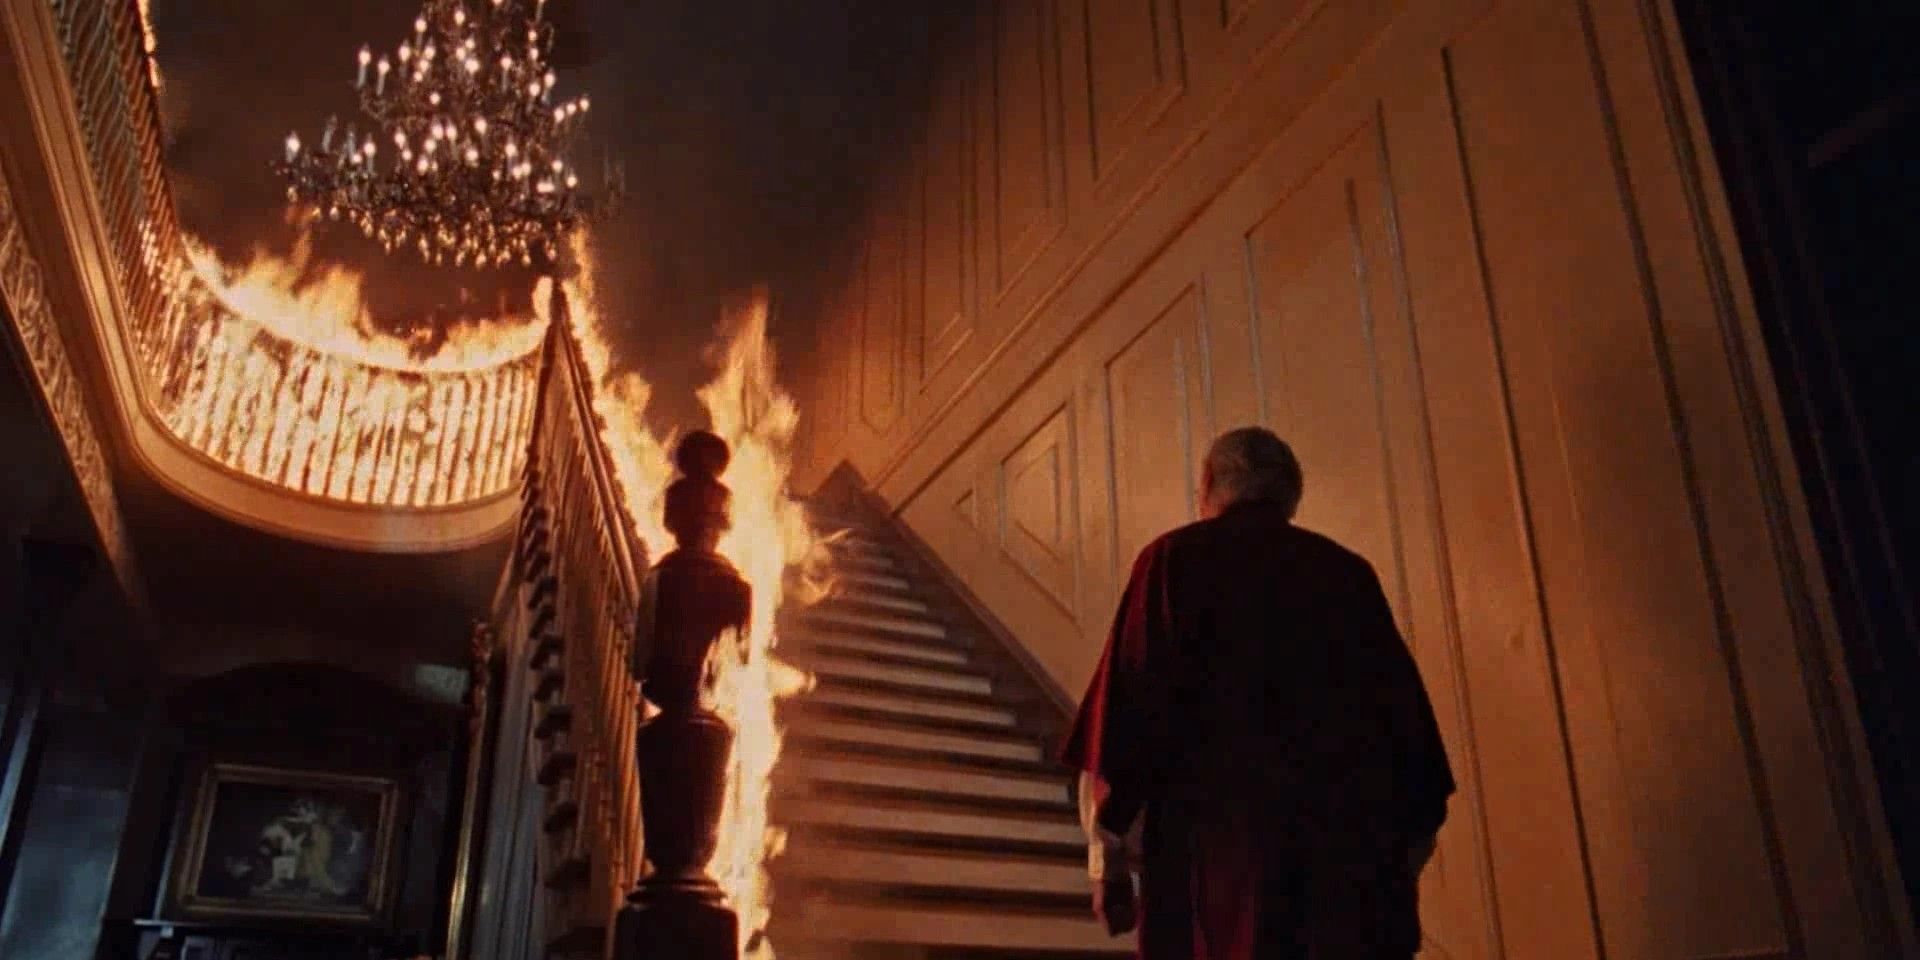 The man standing at the bottom of the burning stairs in The Changeling